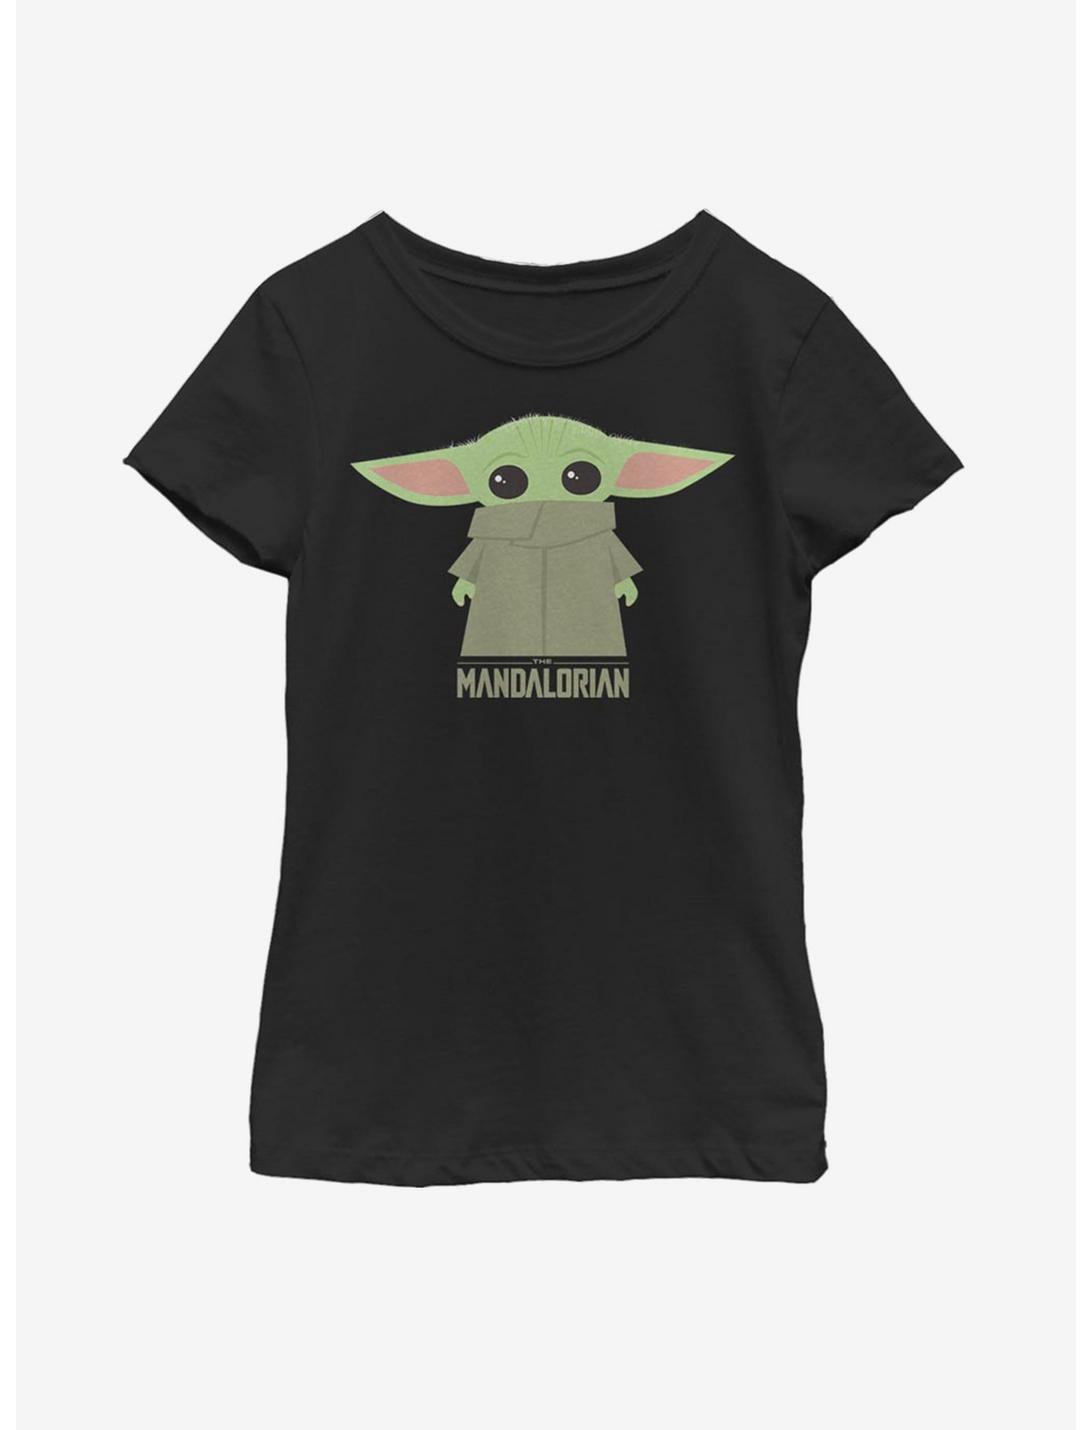 Star Wars The Mandalorian The Child Chibi Covered Face Youth Girls T-Shirt, BLACK, hi-res